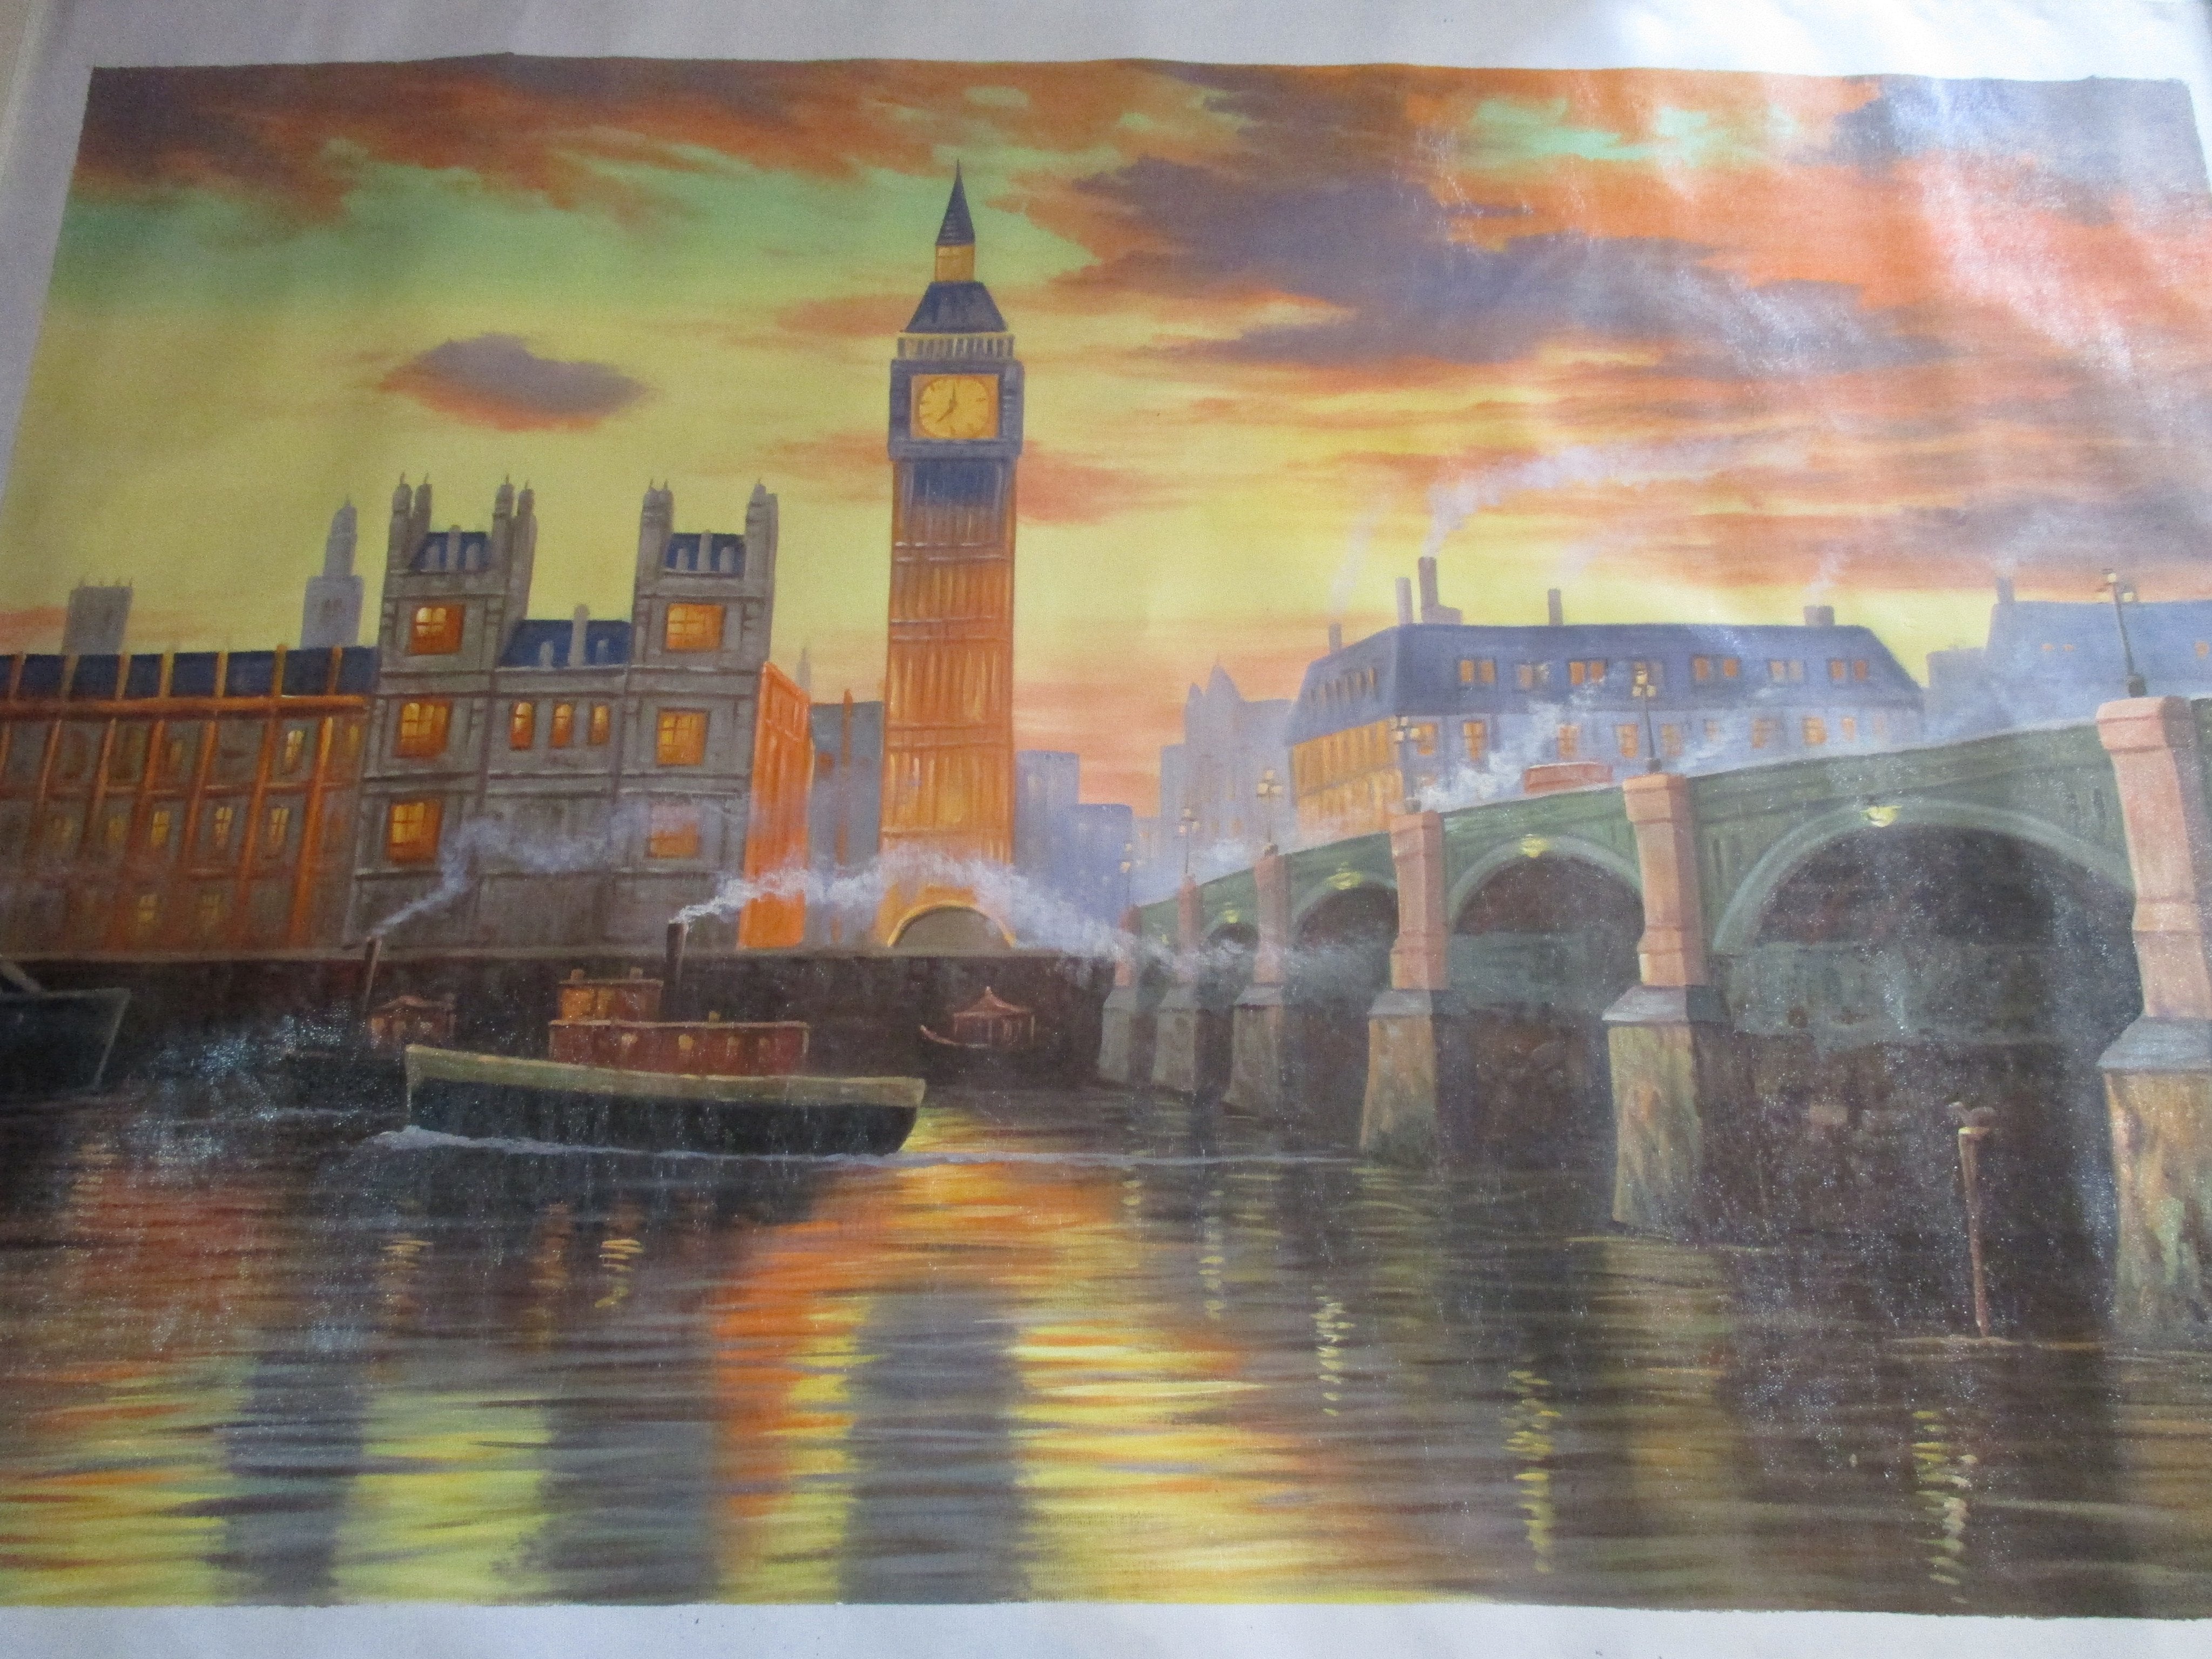 LARGE OIL PAINTING OF THE RIVER THAMES AND BIG BEN LONDON UNFRAMED - London Art and Souvenirs